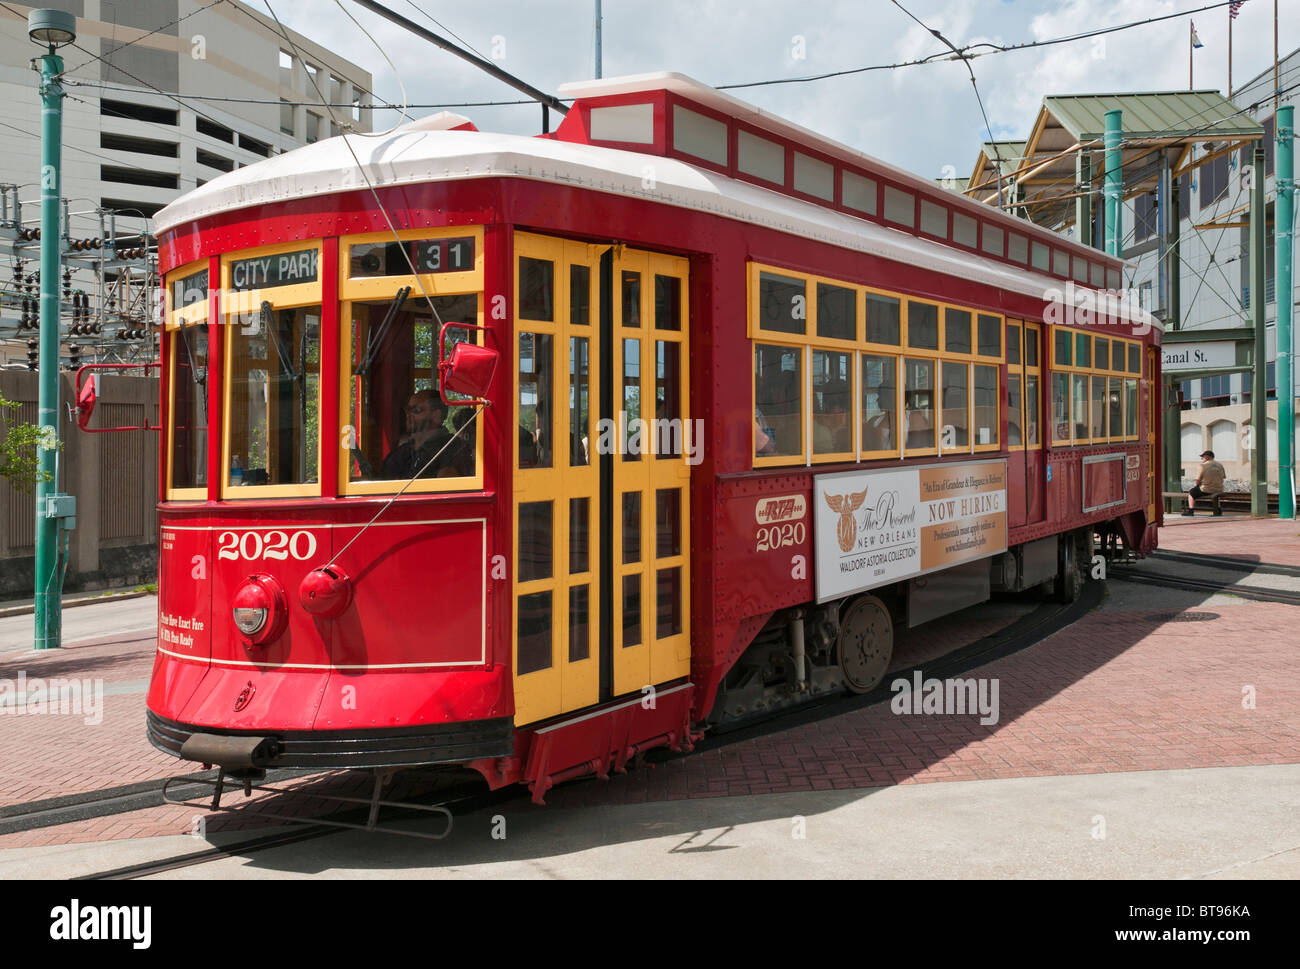 Louisiana, New Orleans, Downtown, Canal Street Station, trolly car, streetcar Stock Photo